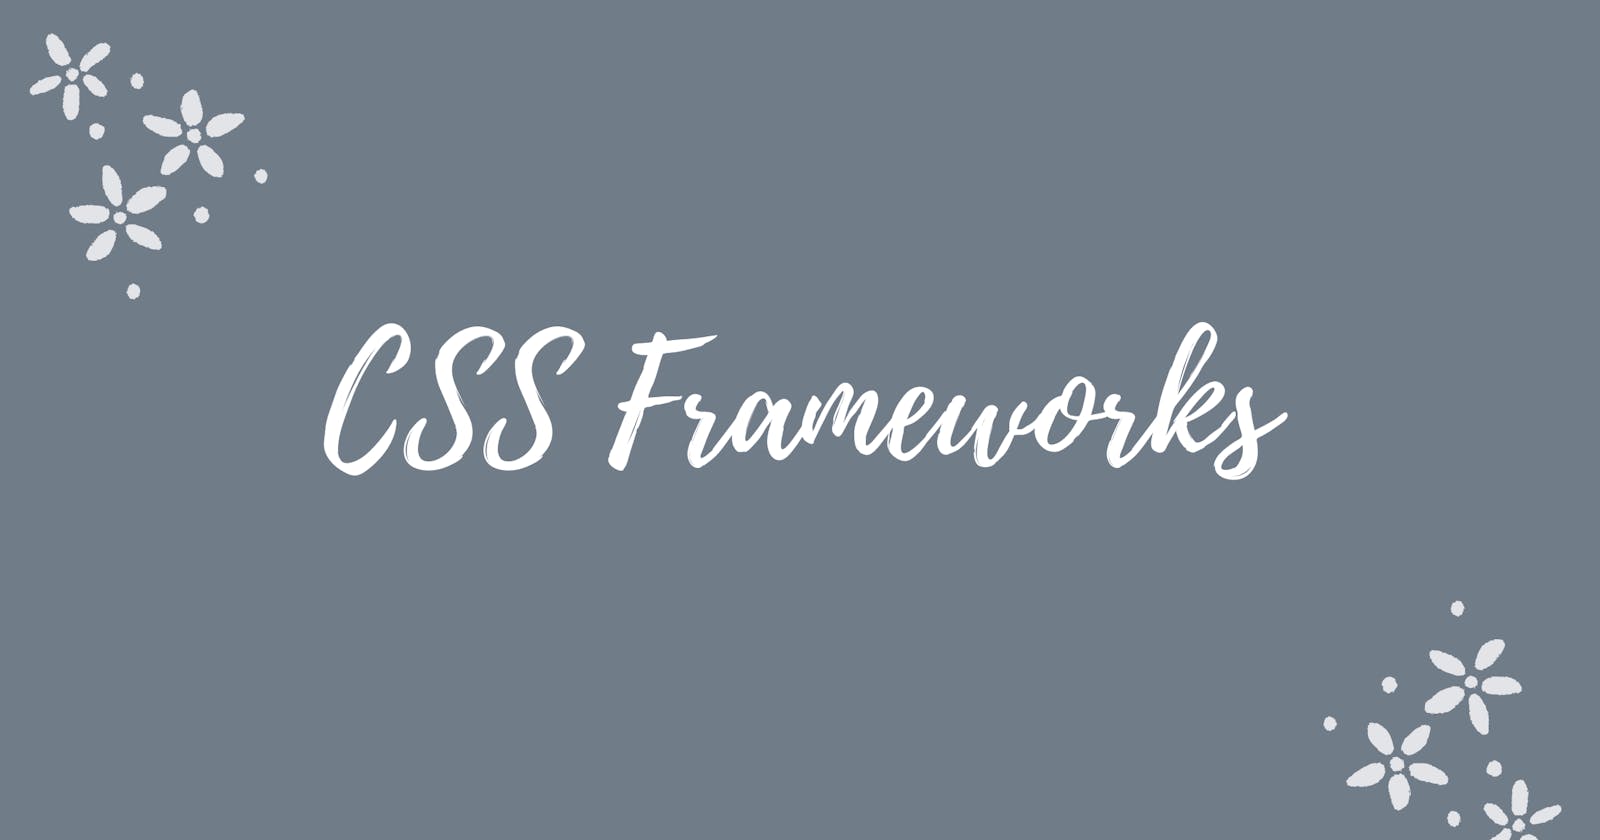 10 Most used CSS Frameworks by Web-Developers